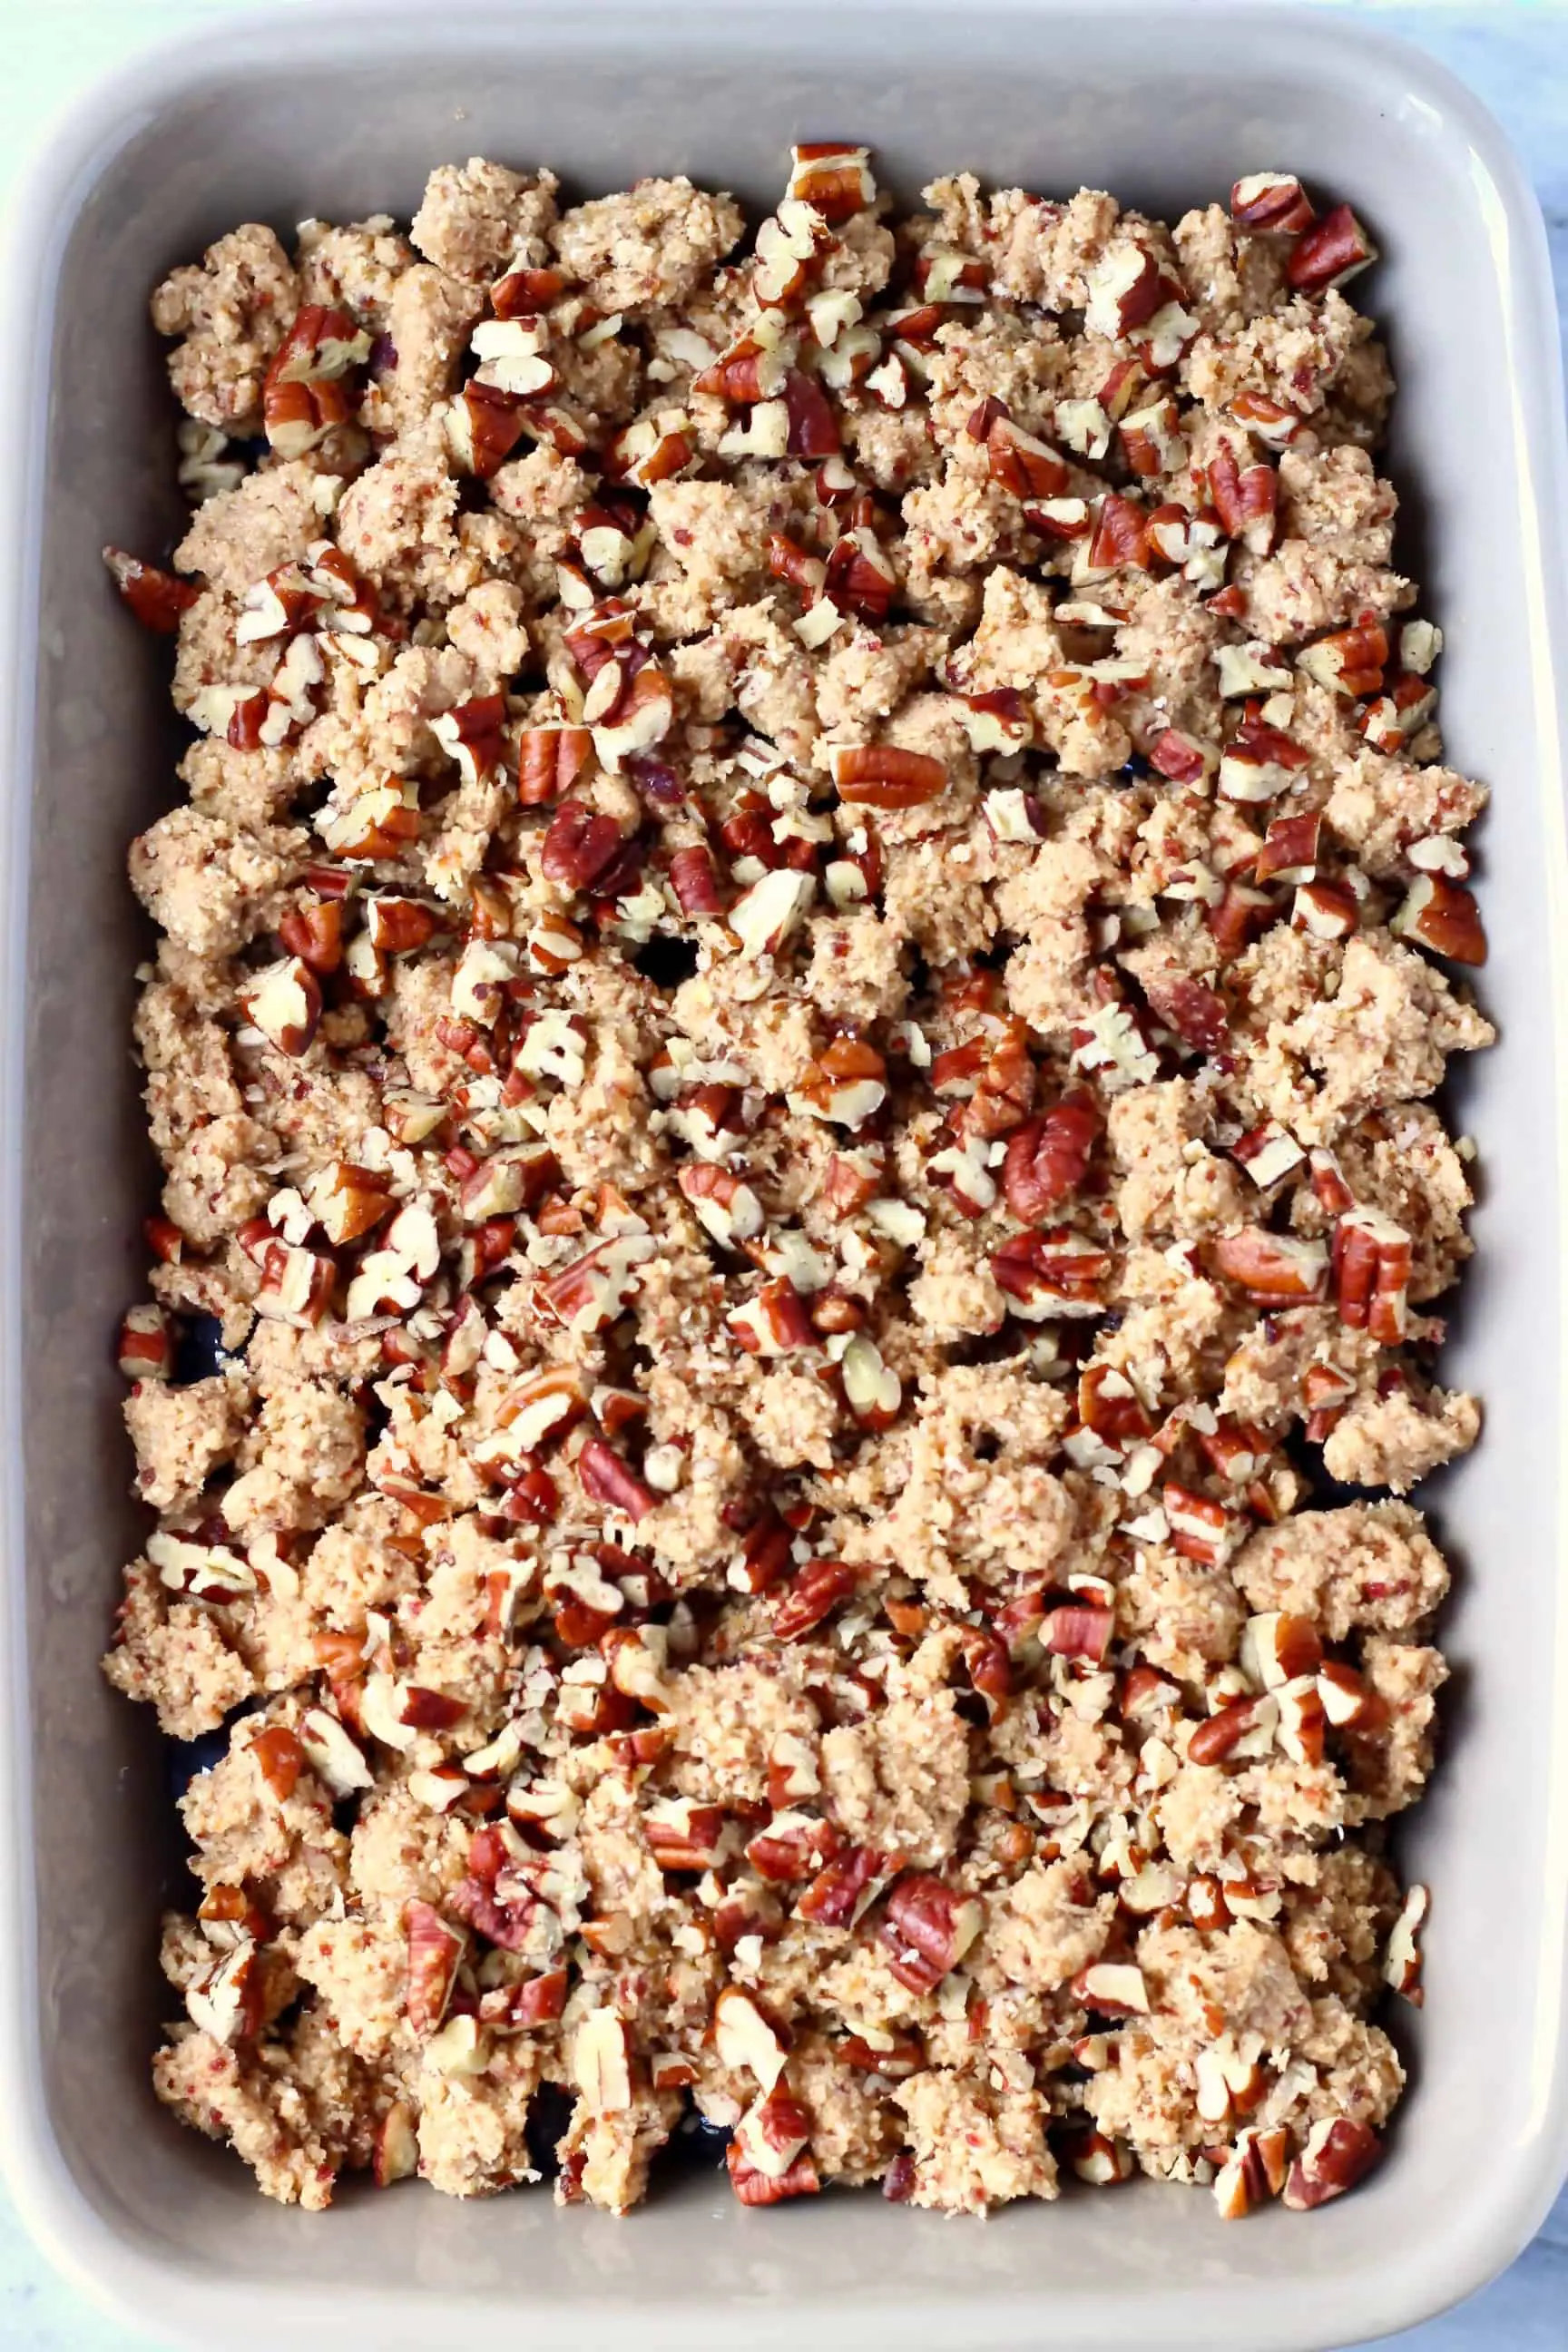 Raw blueberry crisp topped with pecan nuts in a grey baking dish